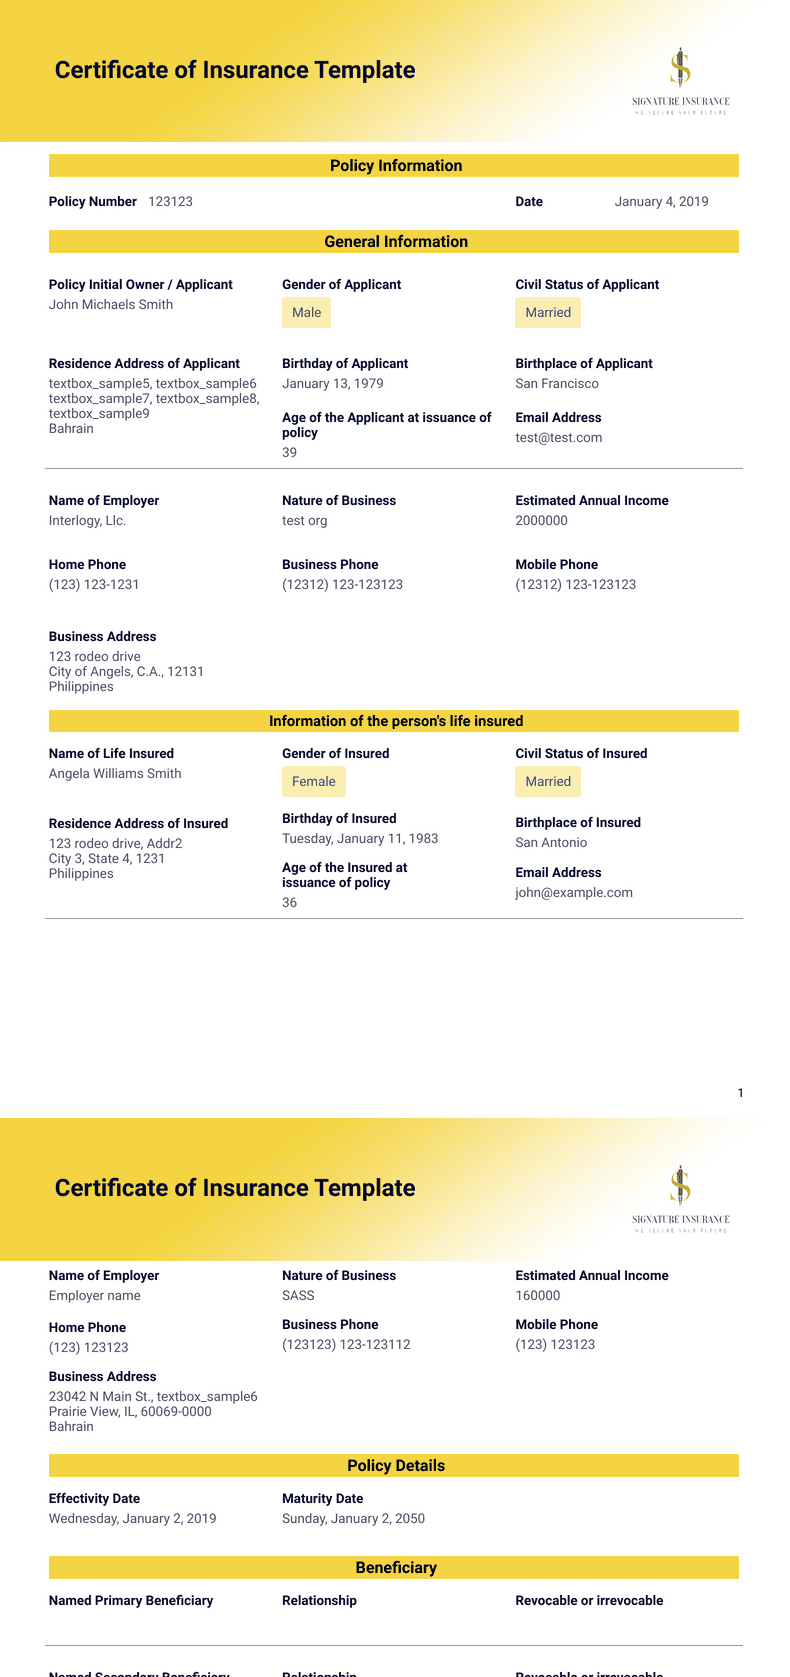 certificate of liability insurance template